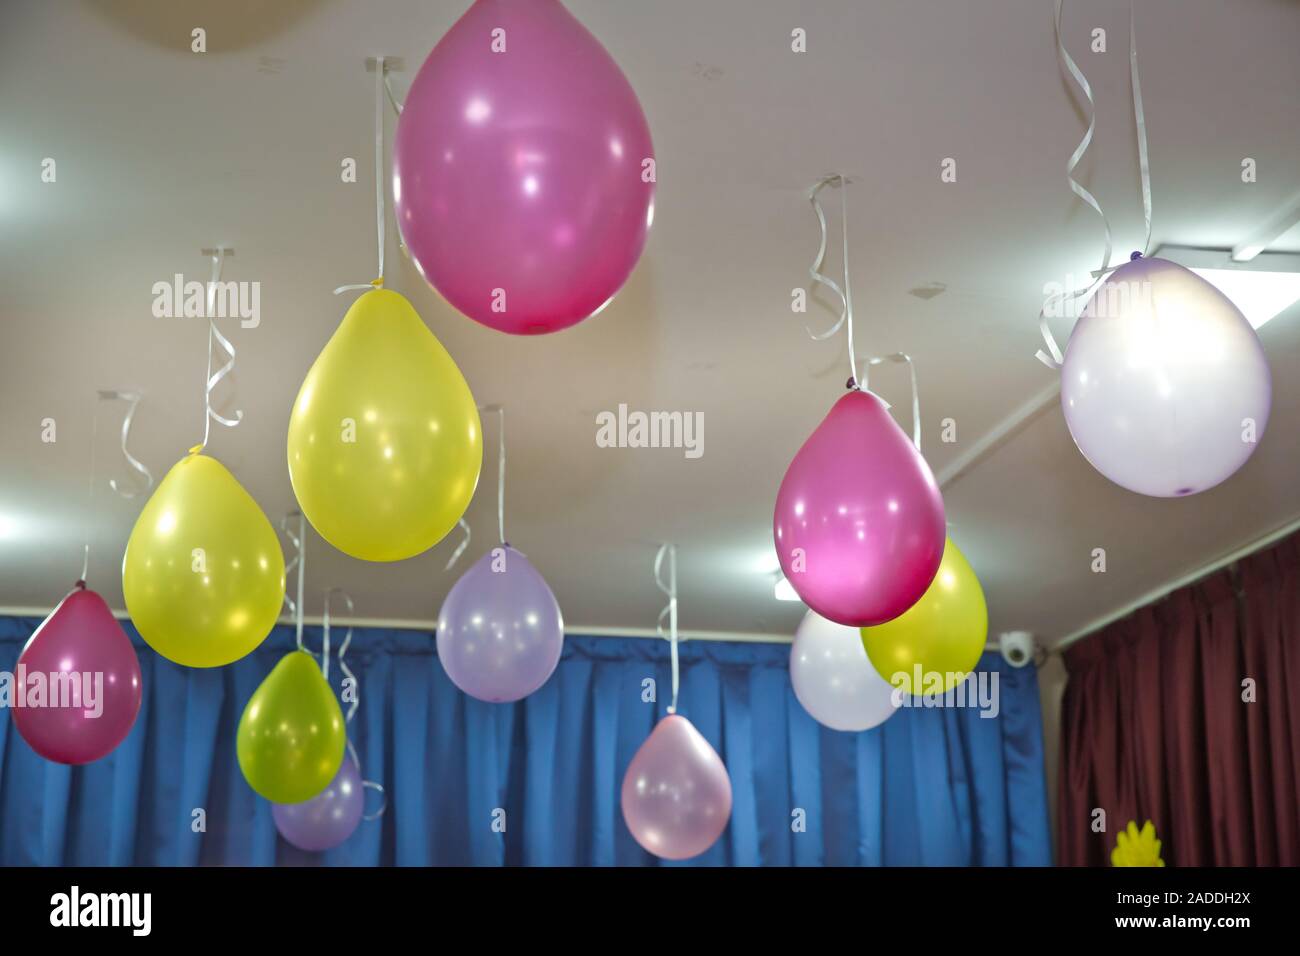 Pink And Yellow Balloons Float On The White Ceiling In The